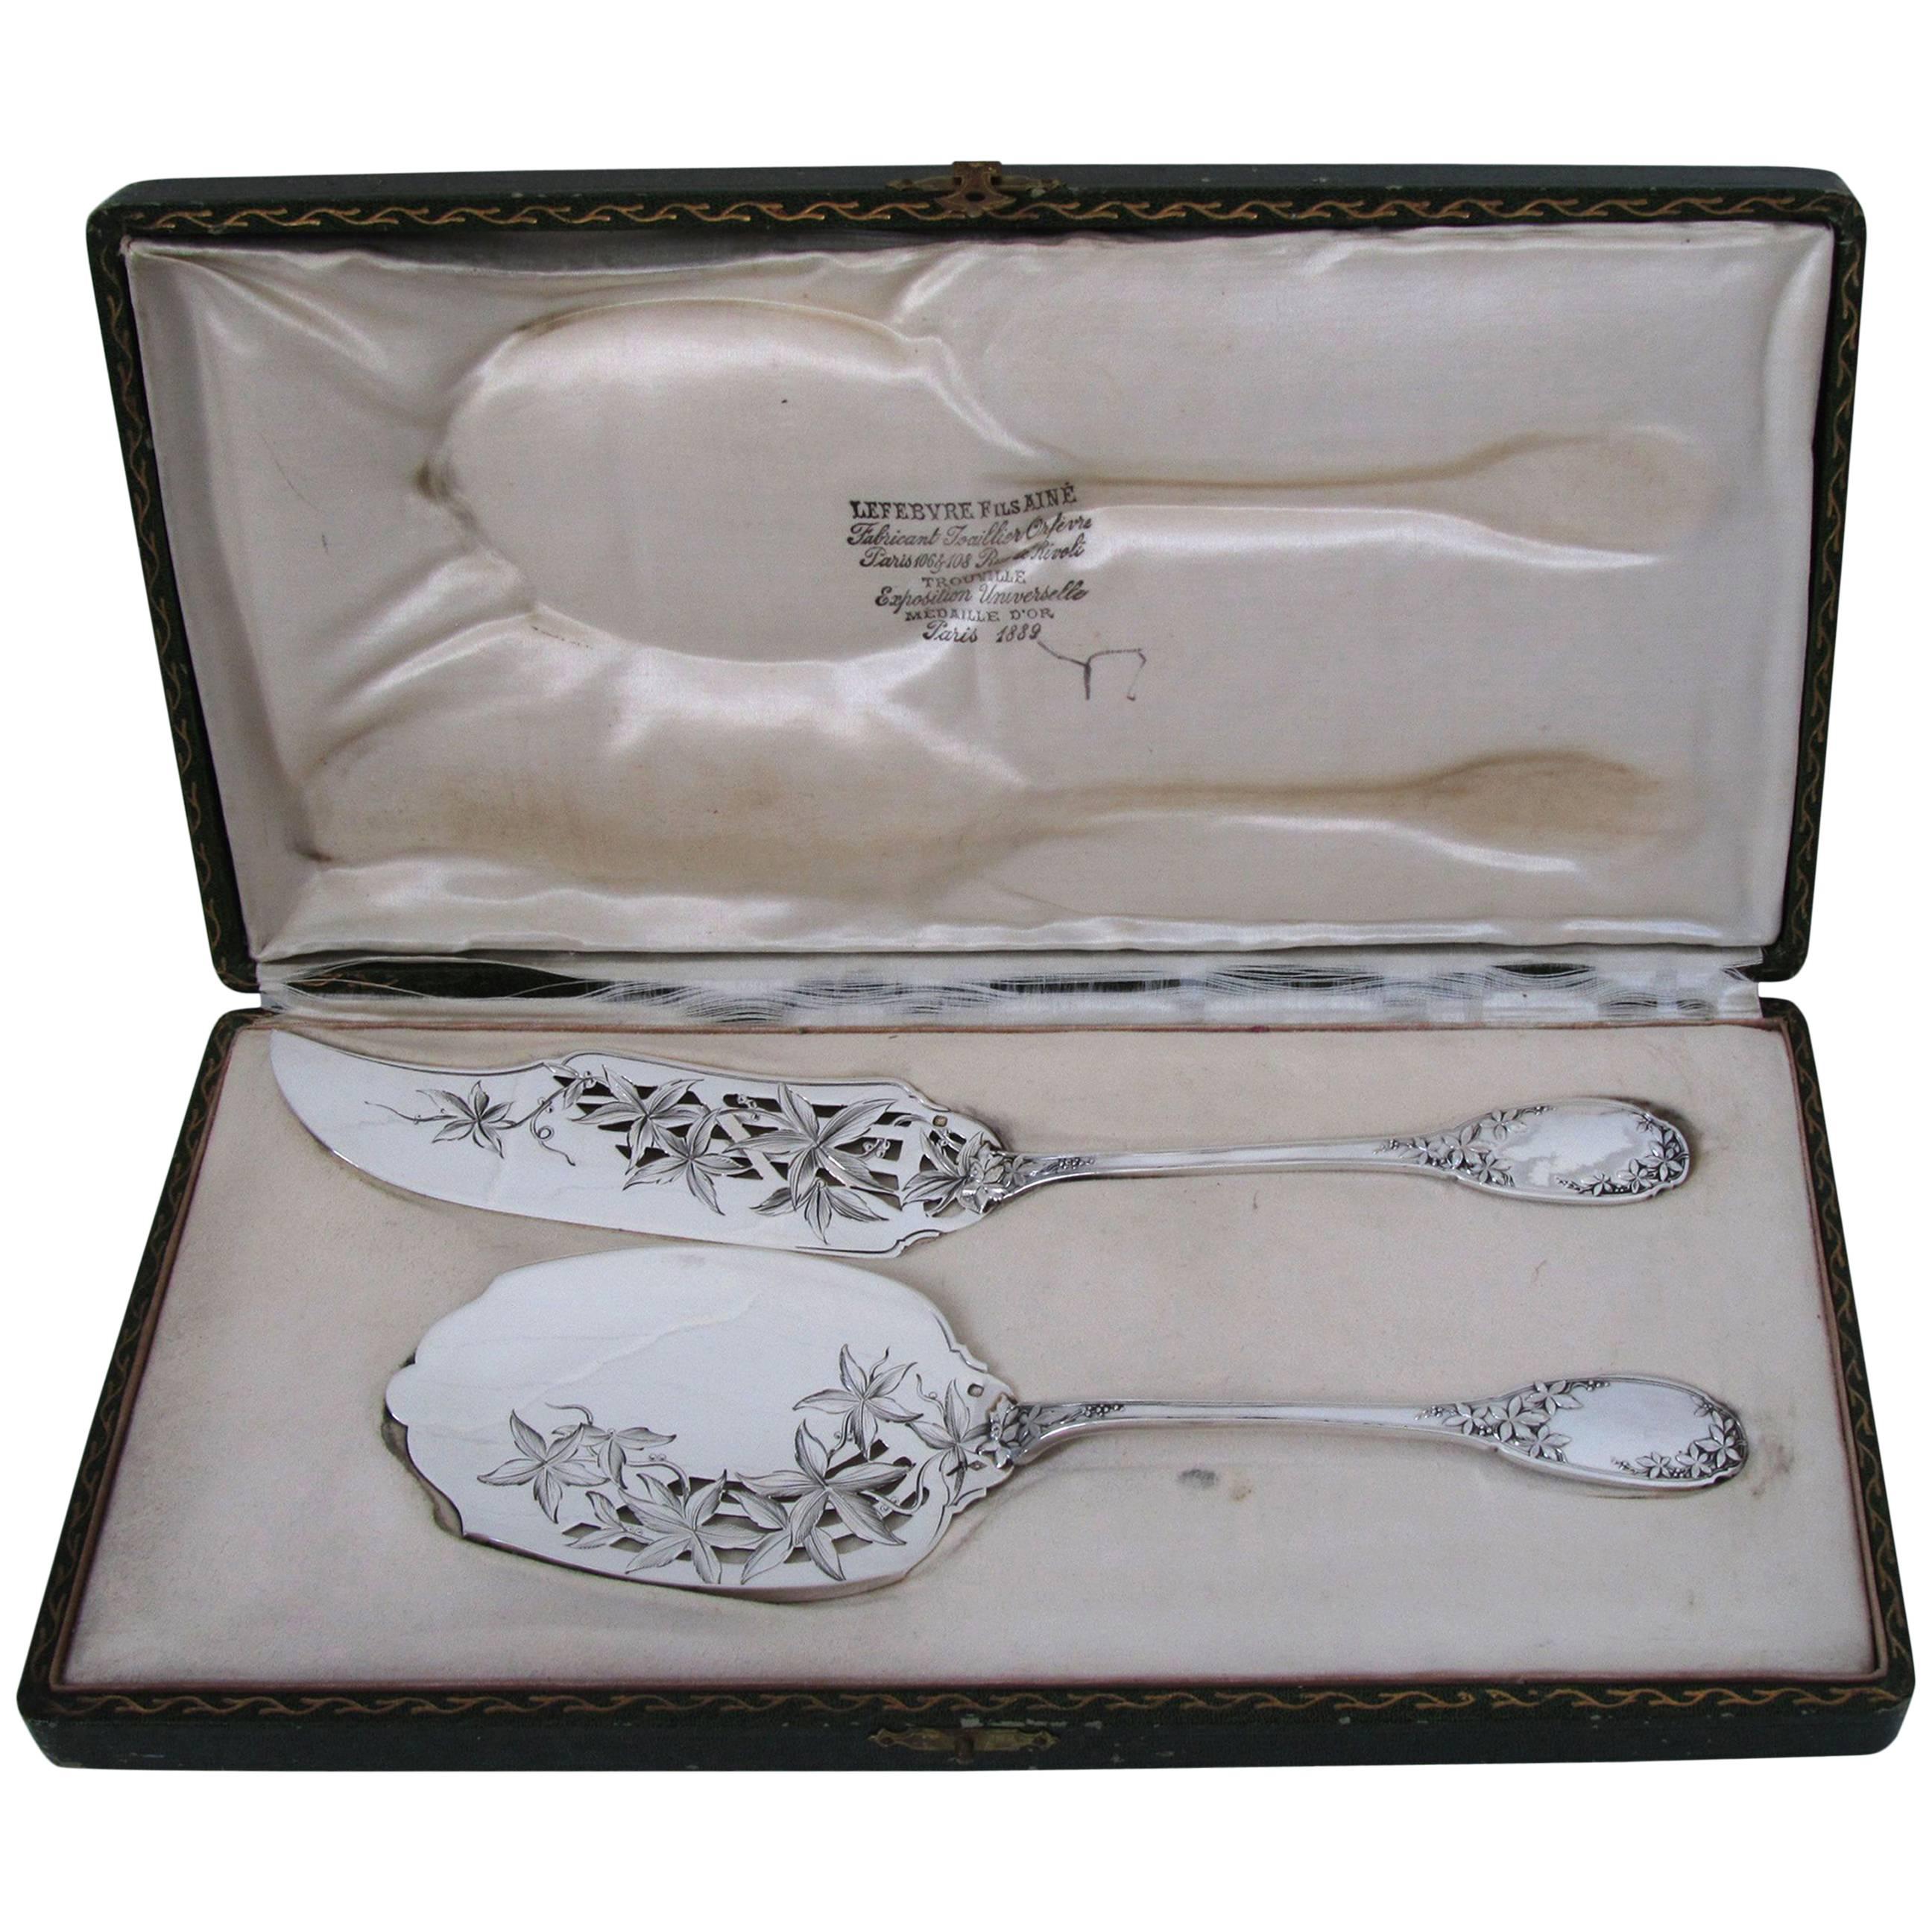 Fabulous French Sterling Silver Ice Cream Set 2 pc with box Vine Leaves pattern